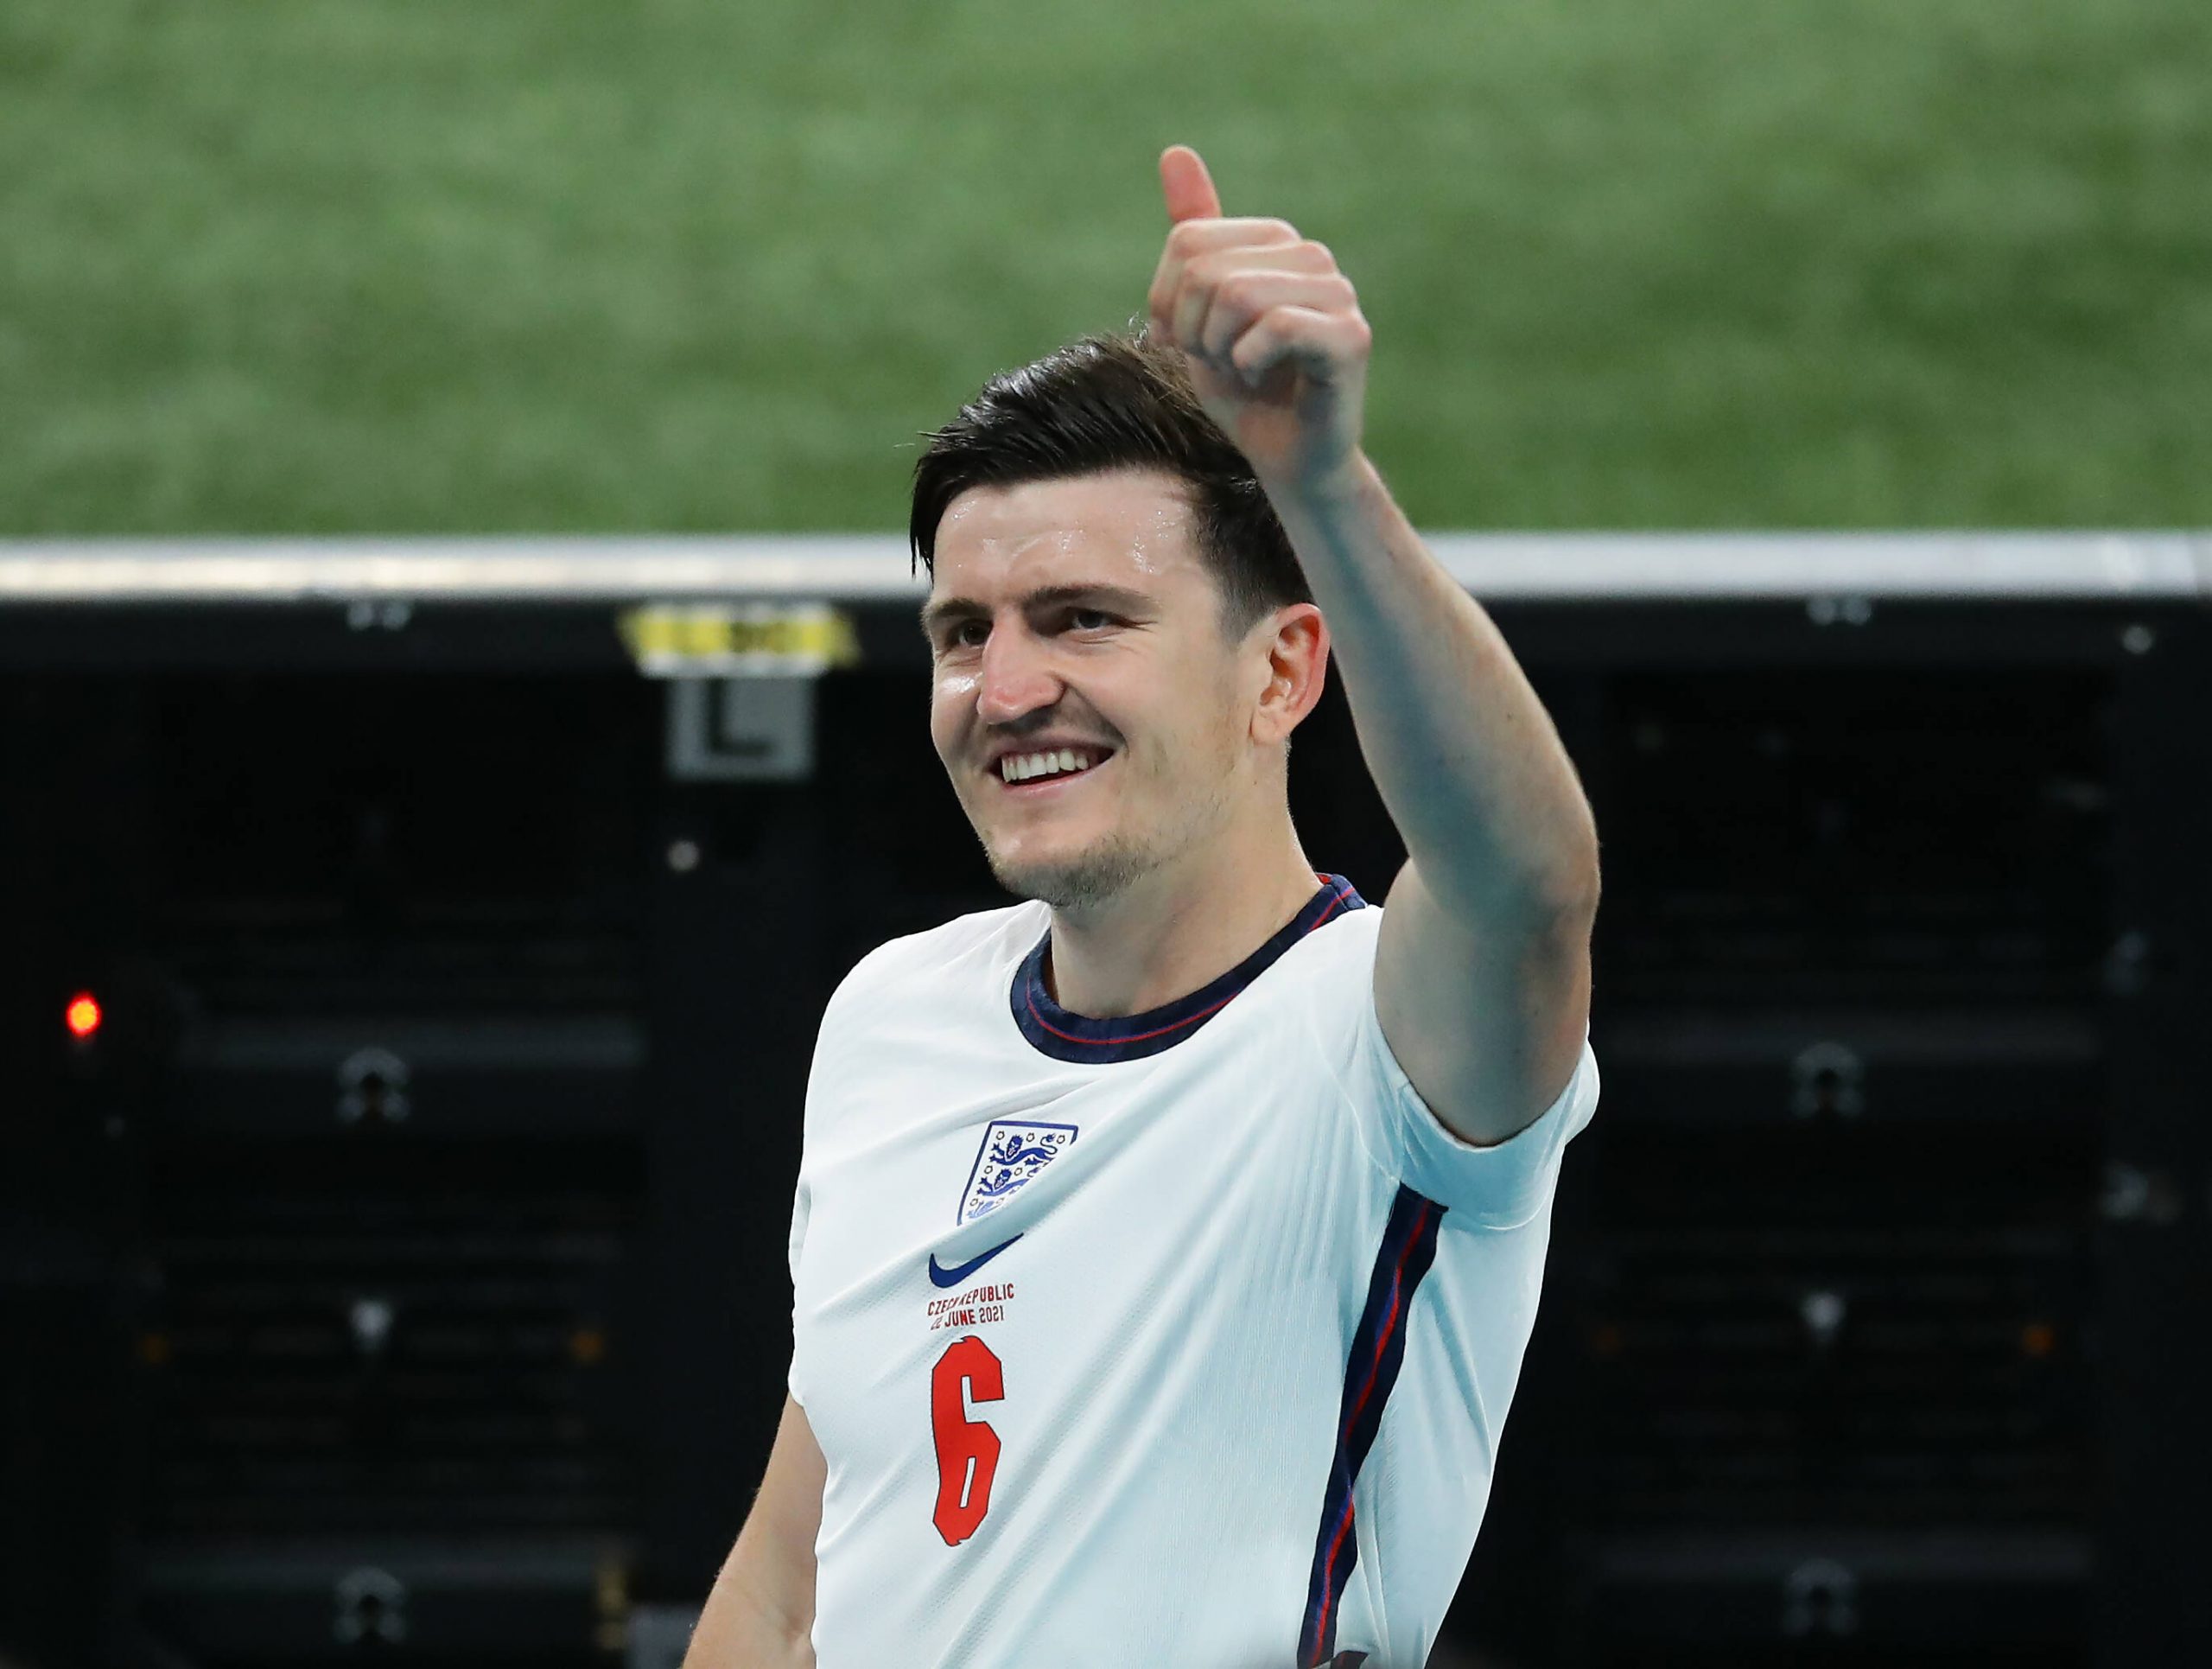 Harry Maguire in action for England.